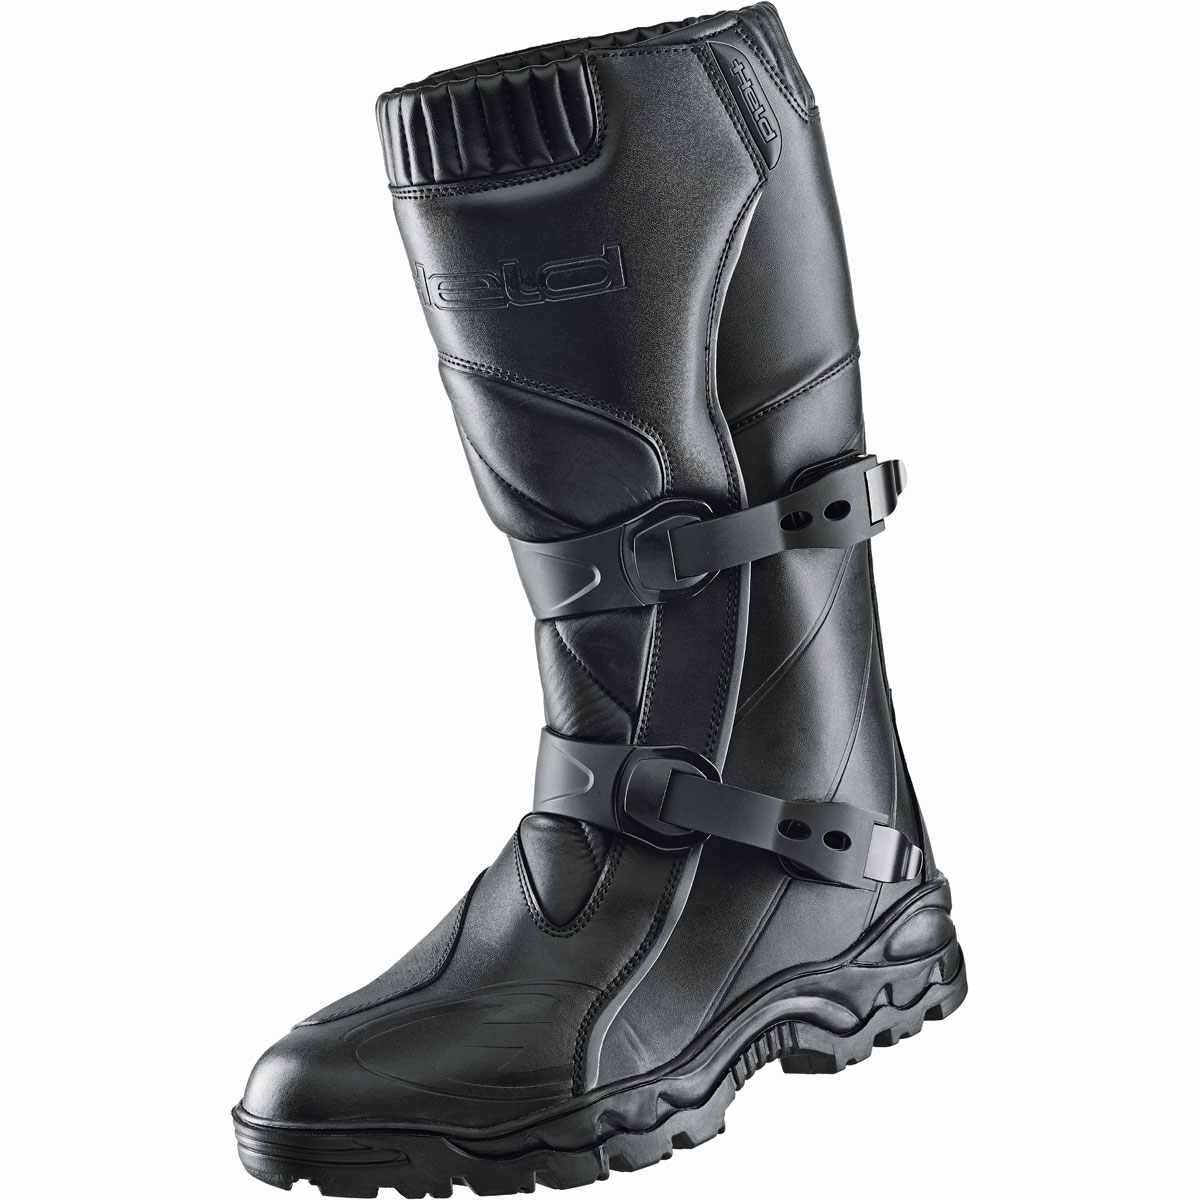 10 of the best adventure boots | Visordown